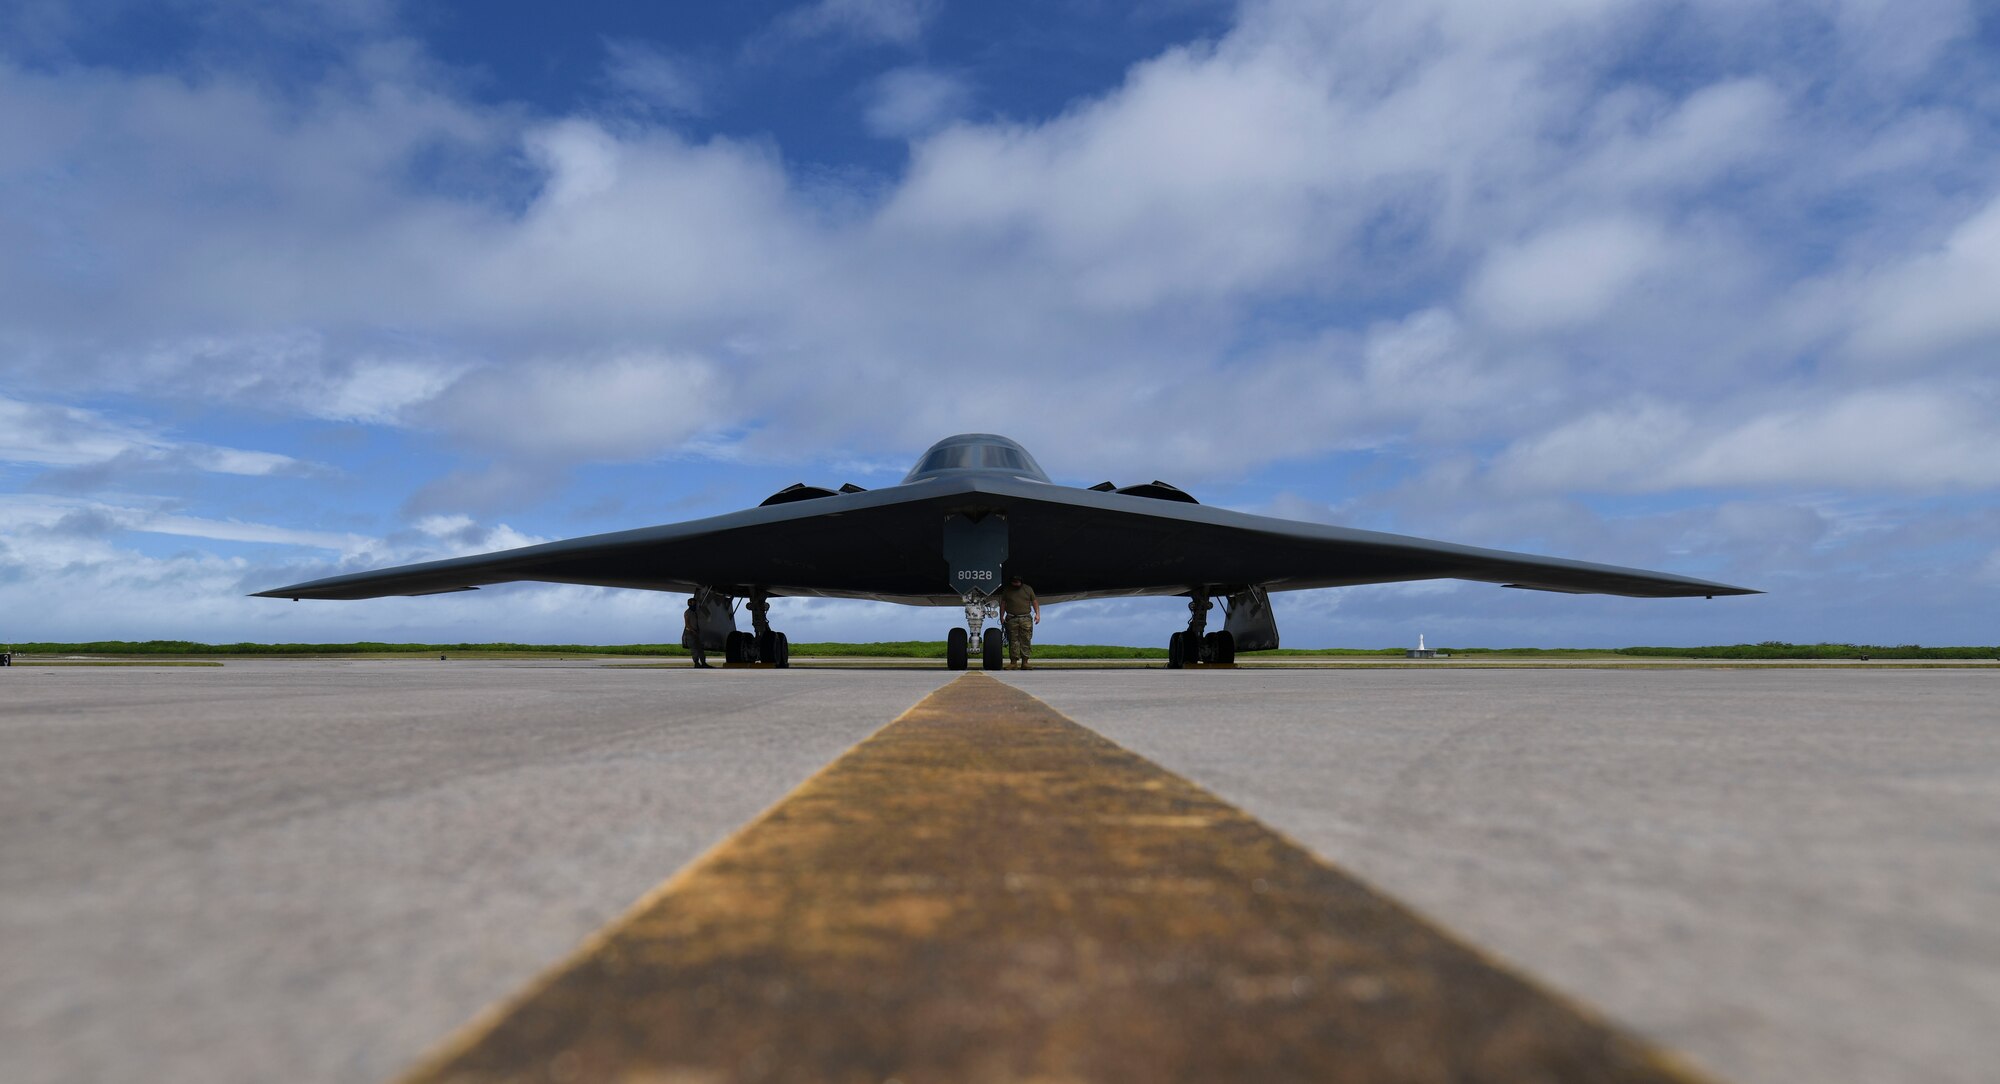 U.S. Air Force Senior Airman Robert Witkowski and Staff Sgt. Mark Farrar, 393rd Expeditionary Bomb Squadron crew chiefs, deployed from Whiteman Air Force Base, Missouri, prepare a B-2 Spirit Stealth Bomber for take-off at Naval Support Facility Diego Garcia, to support a Bomber Task Force mission,  Aug. 17, 2020. Bomber Task Force missions allow U.S. Strategic Command to provide persistent, long-term bomber presence in the Indo-Pacific, and around the globe. Over the course of 24 hours, four B-1B Lancers, two B-2 Spirit Stealth Bombers, and four F-15C Eagles conducted Bomber Task Force missions simultaneously within the Indo-Pacific region. Pacific Air Forces routinely conducts BTF operations to show the United States’ commitment to allies and partners in the Indo-Pacific area of responsibility. (U.S. Air Force photo by Tech. Sgt. Heather Salazar)